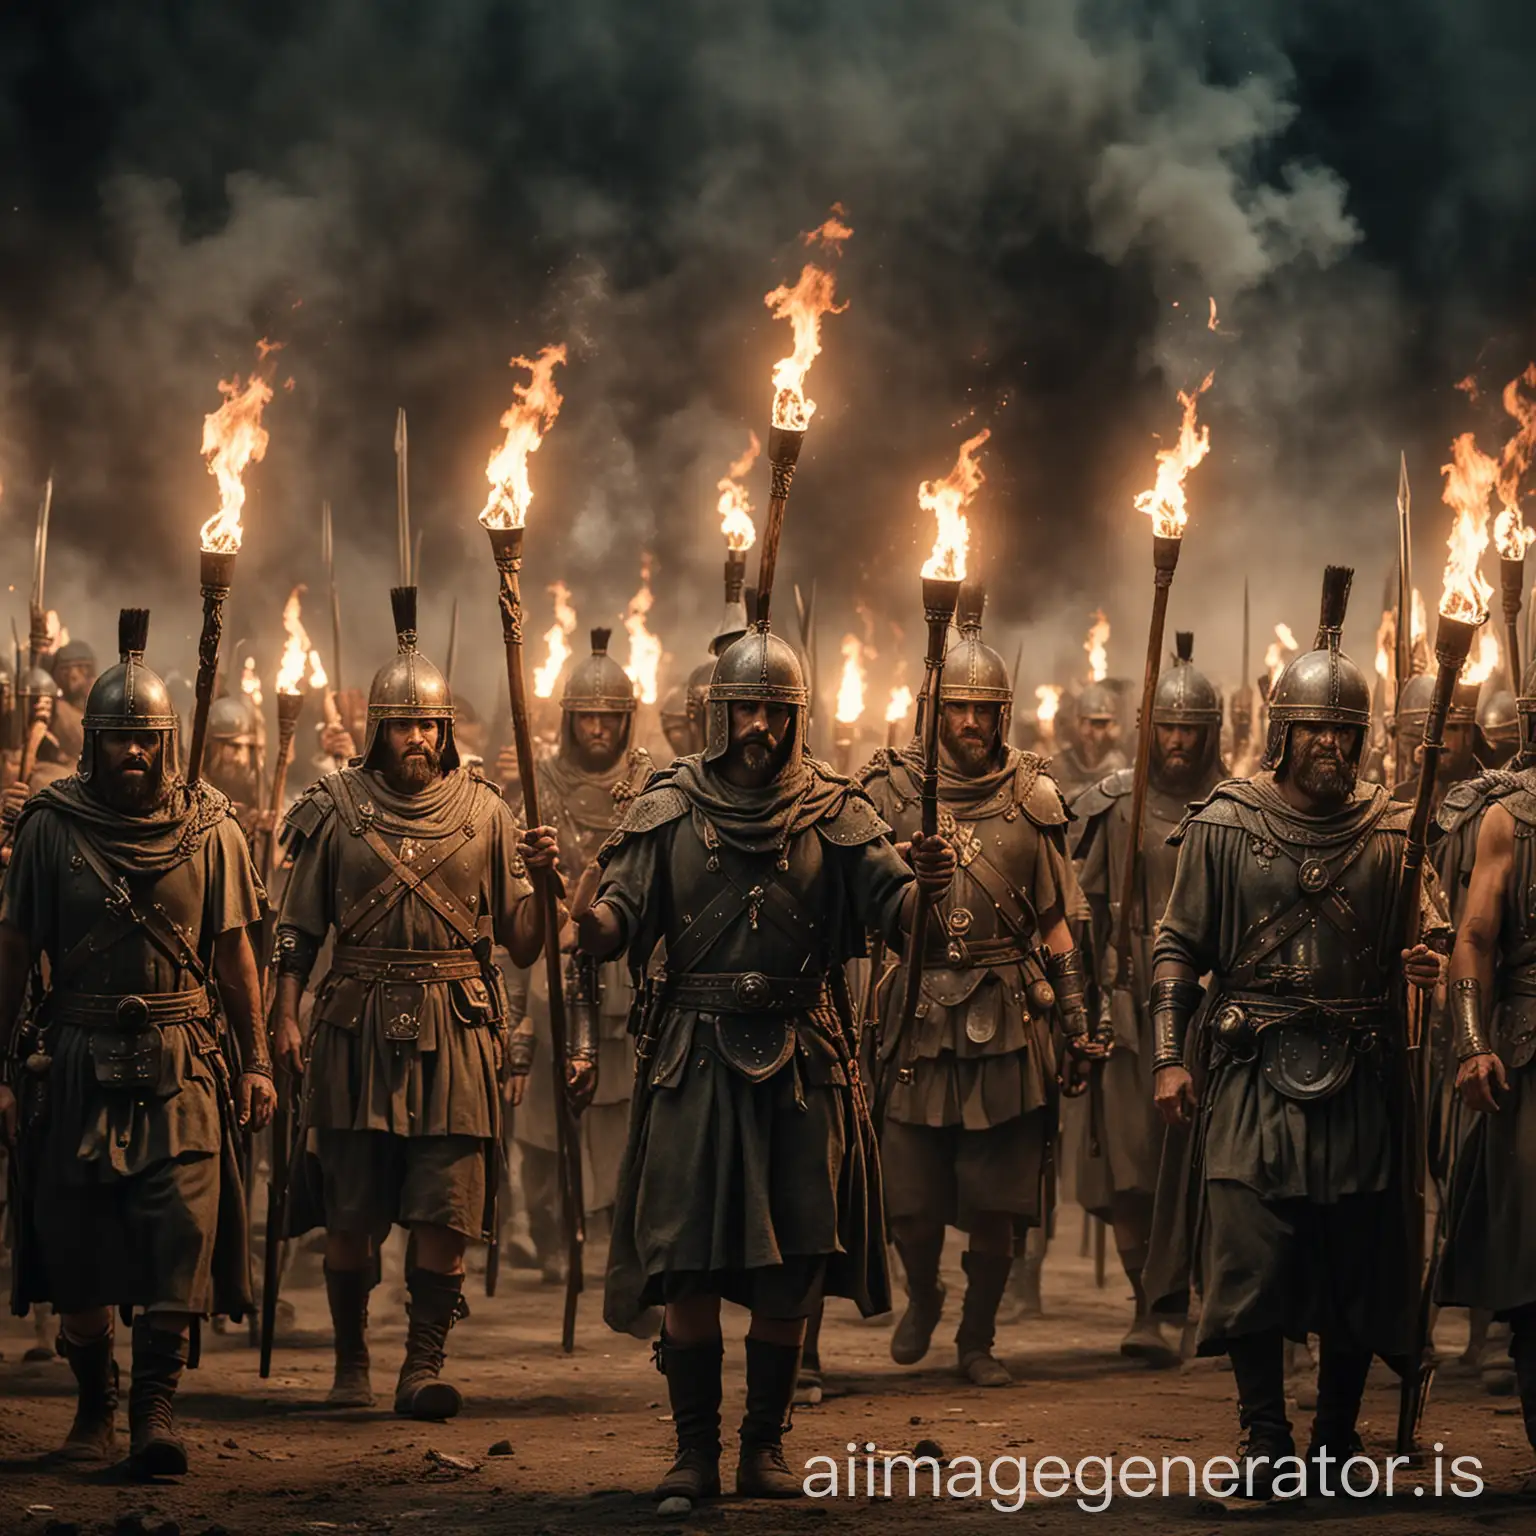 ancient army with torches in hands